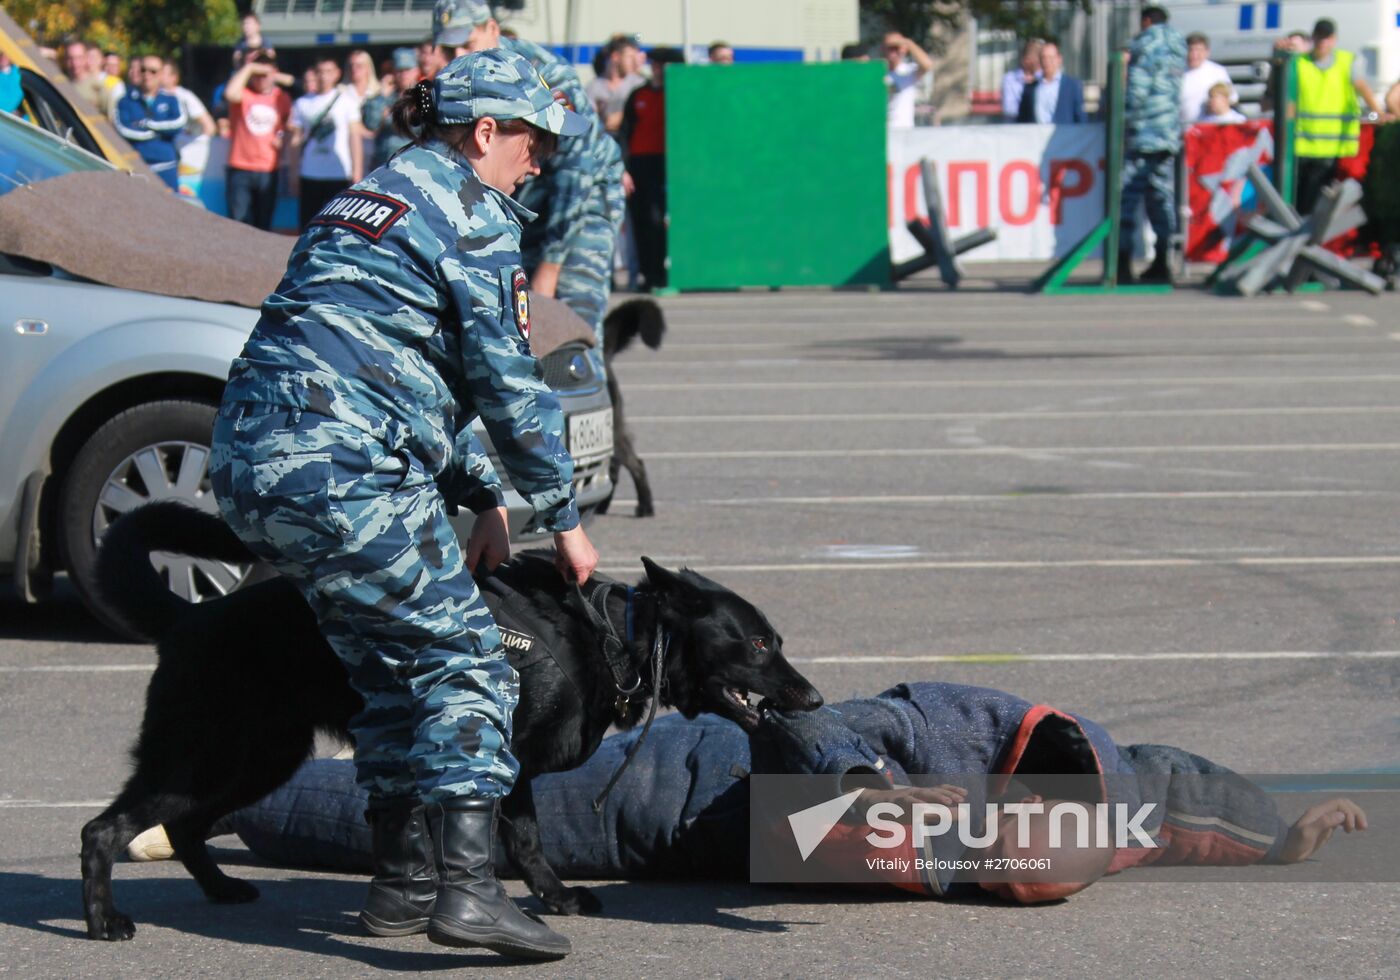 Moscow police sports festival